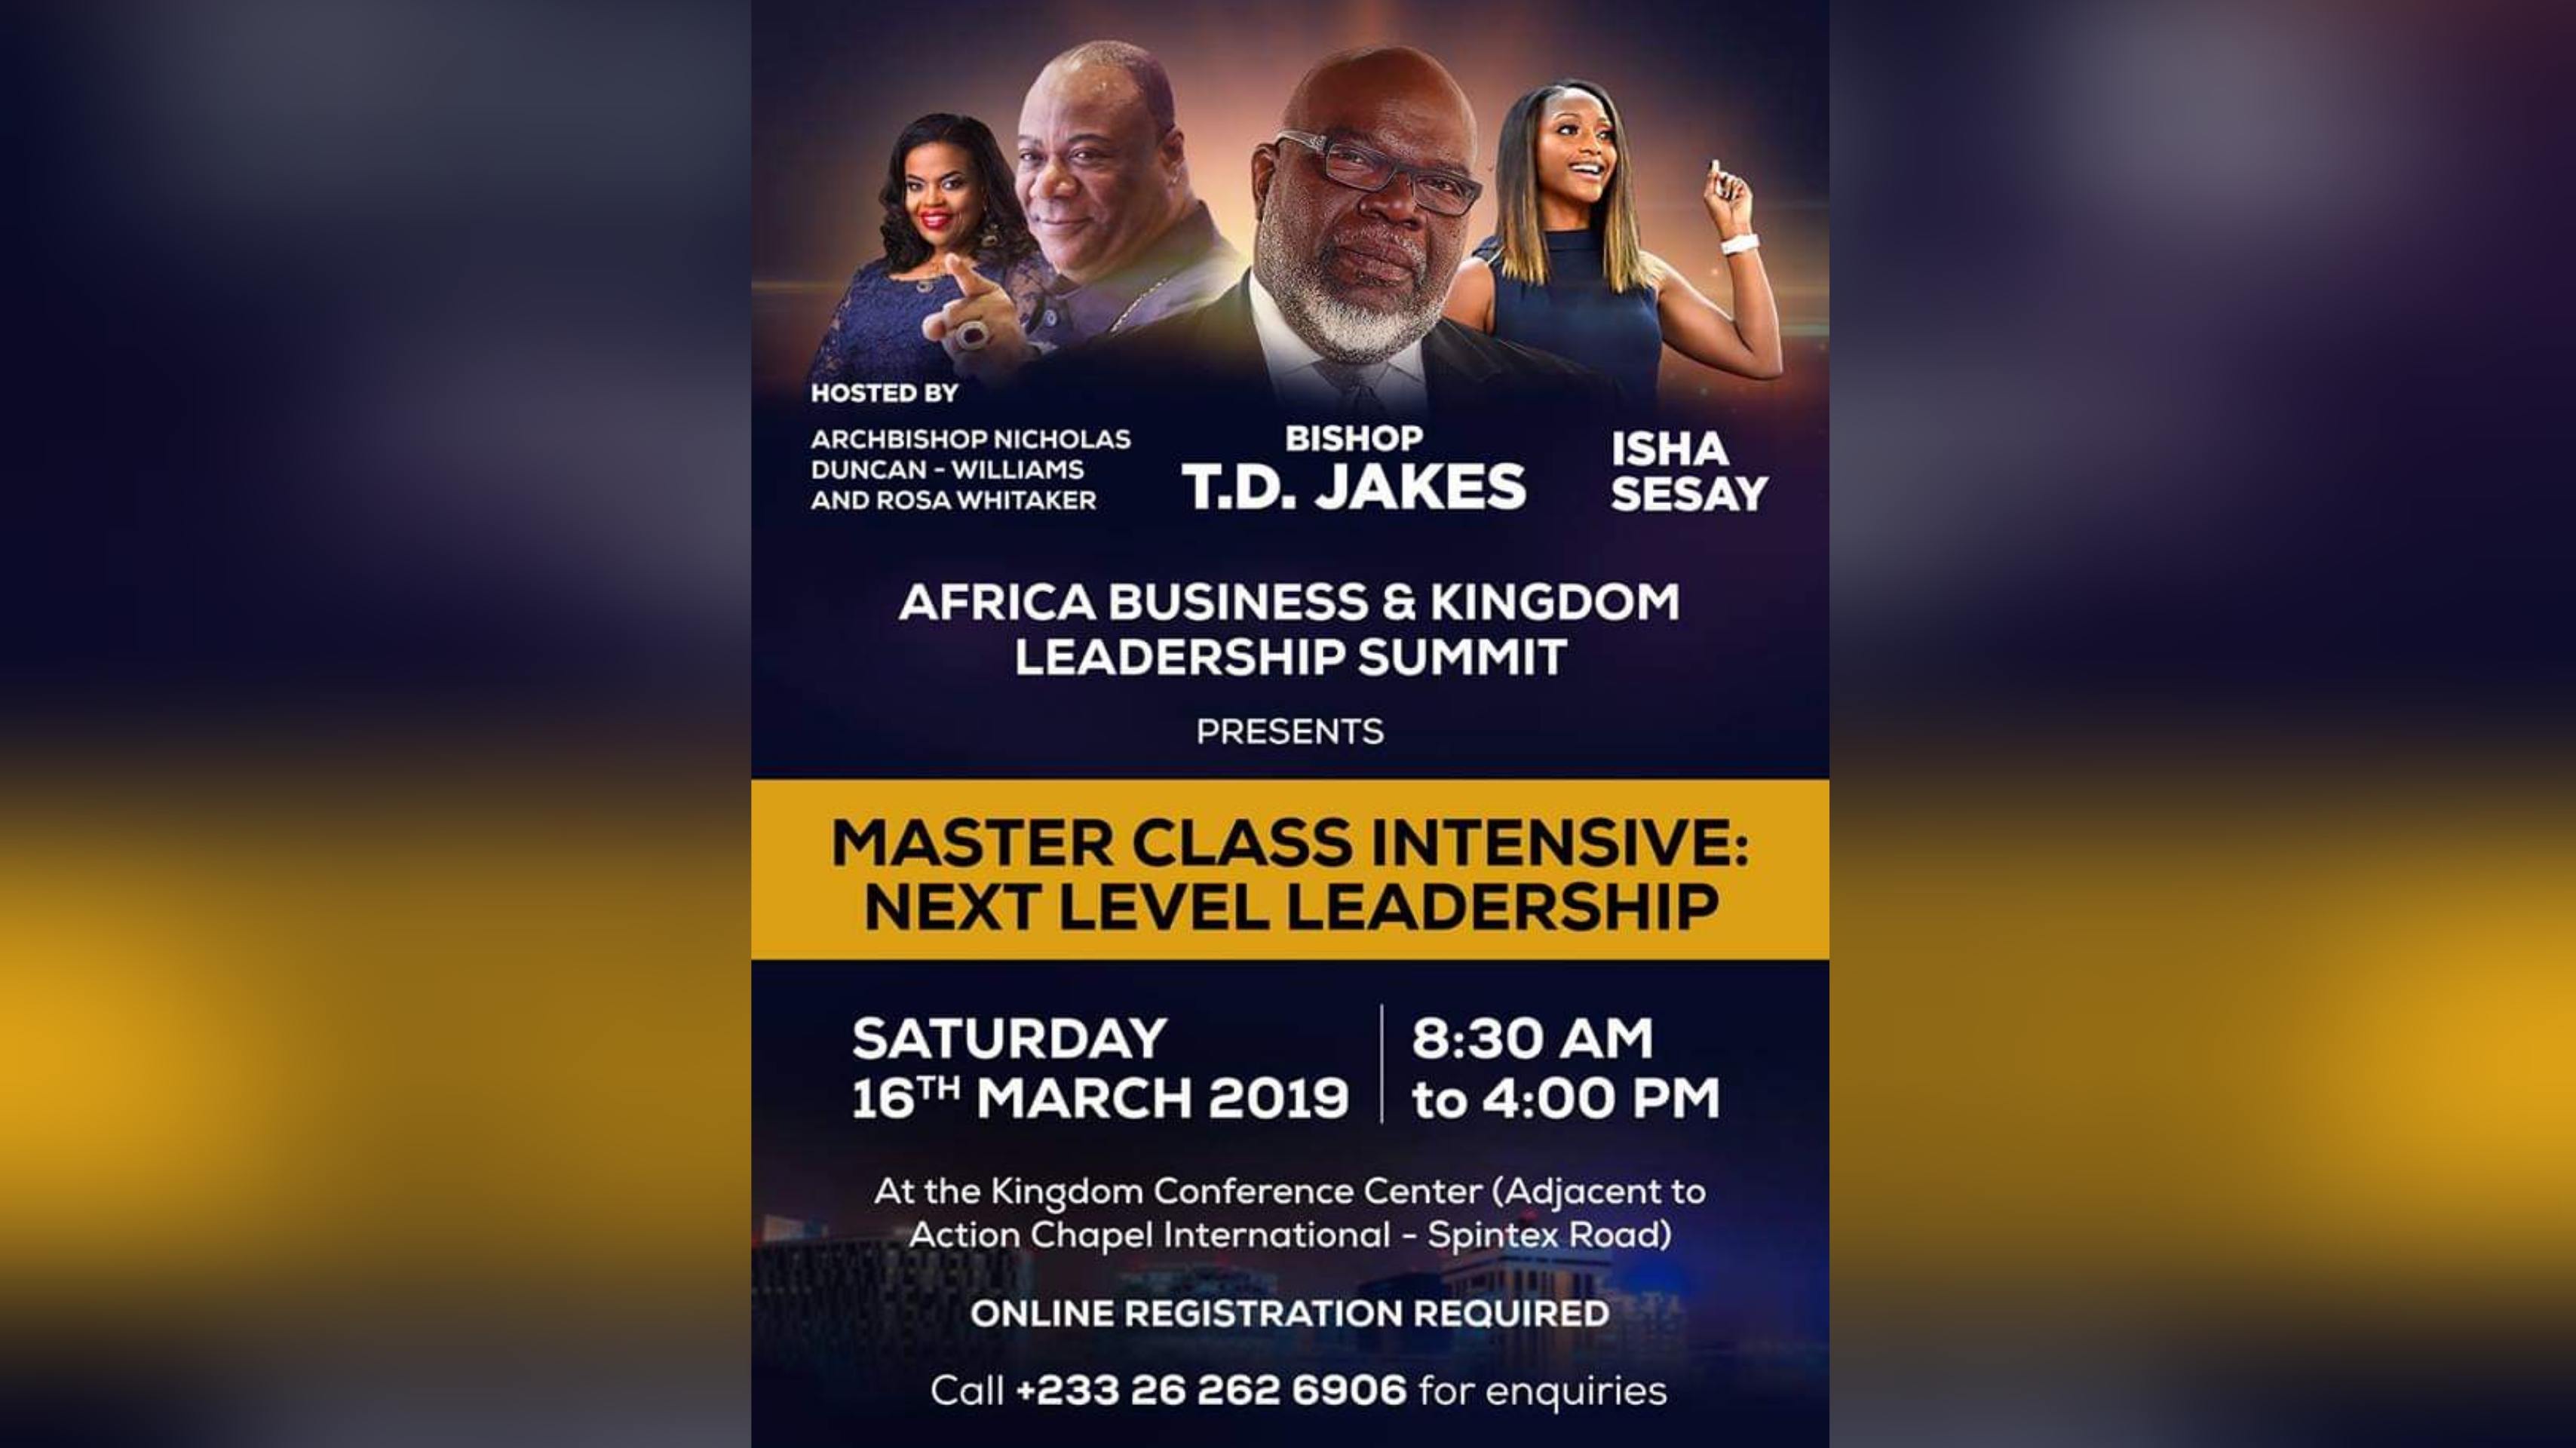 Master Class Intensive Next Level Leadership With T.D. Jakes